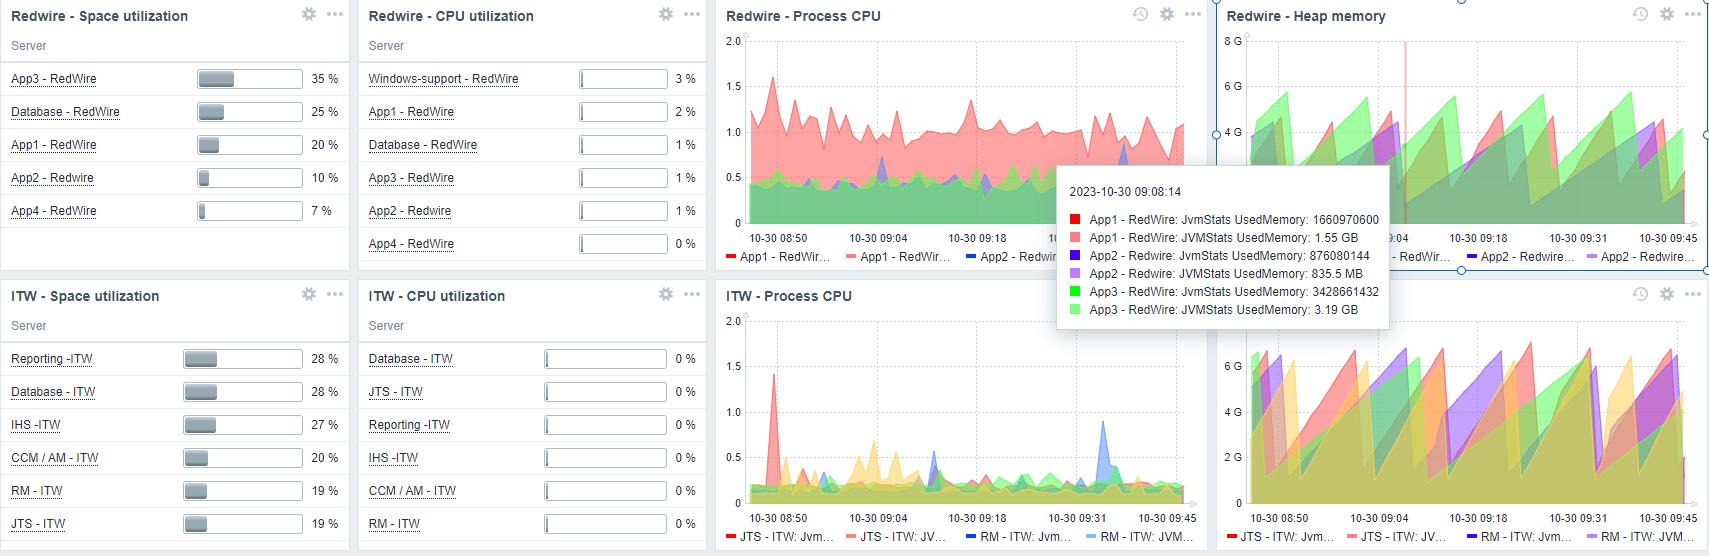 Monitoring of space and CPU utilization for physical servers or VMs and for JVM